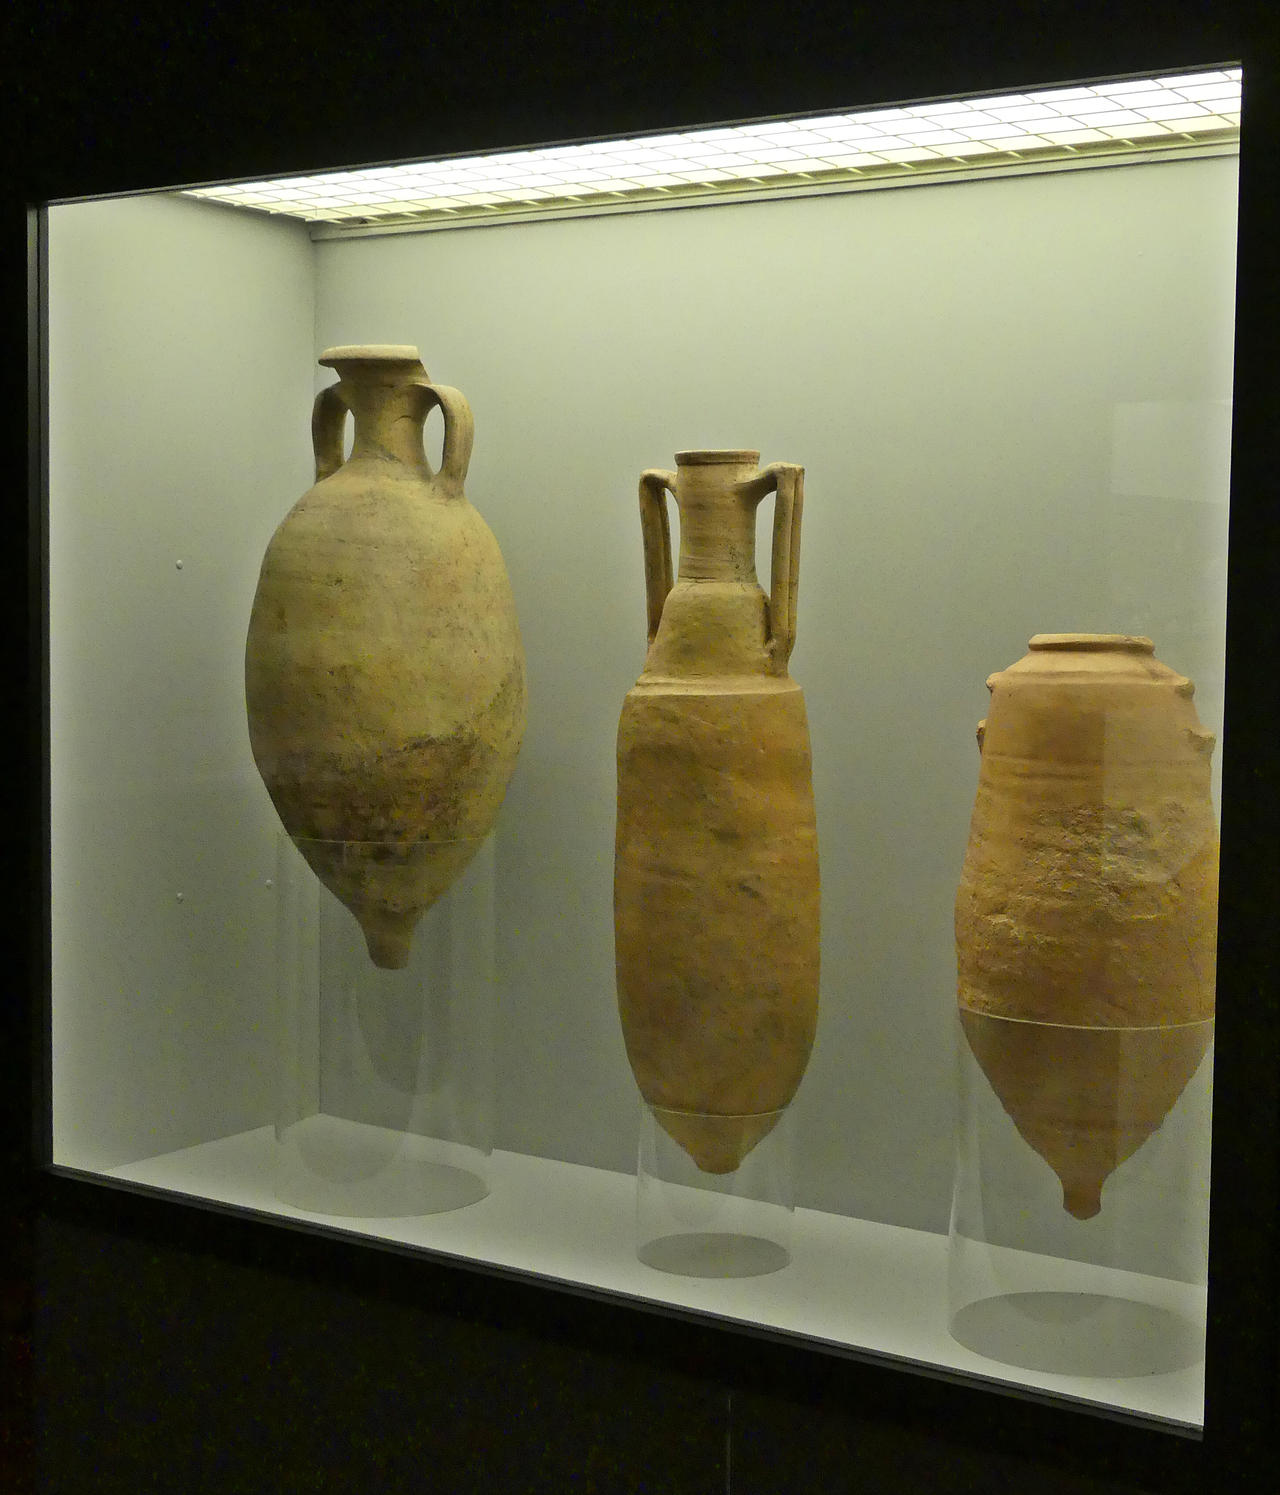 Perfectly preserved amphoras.